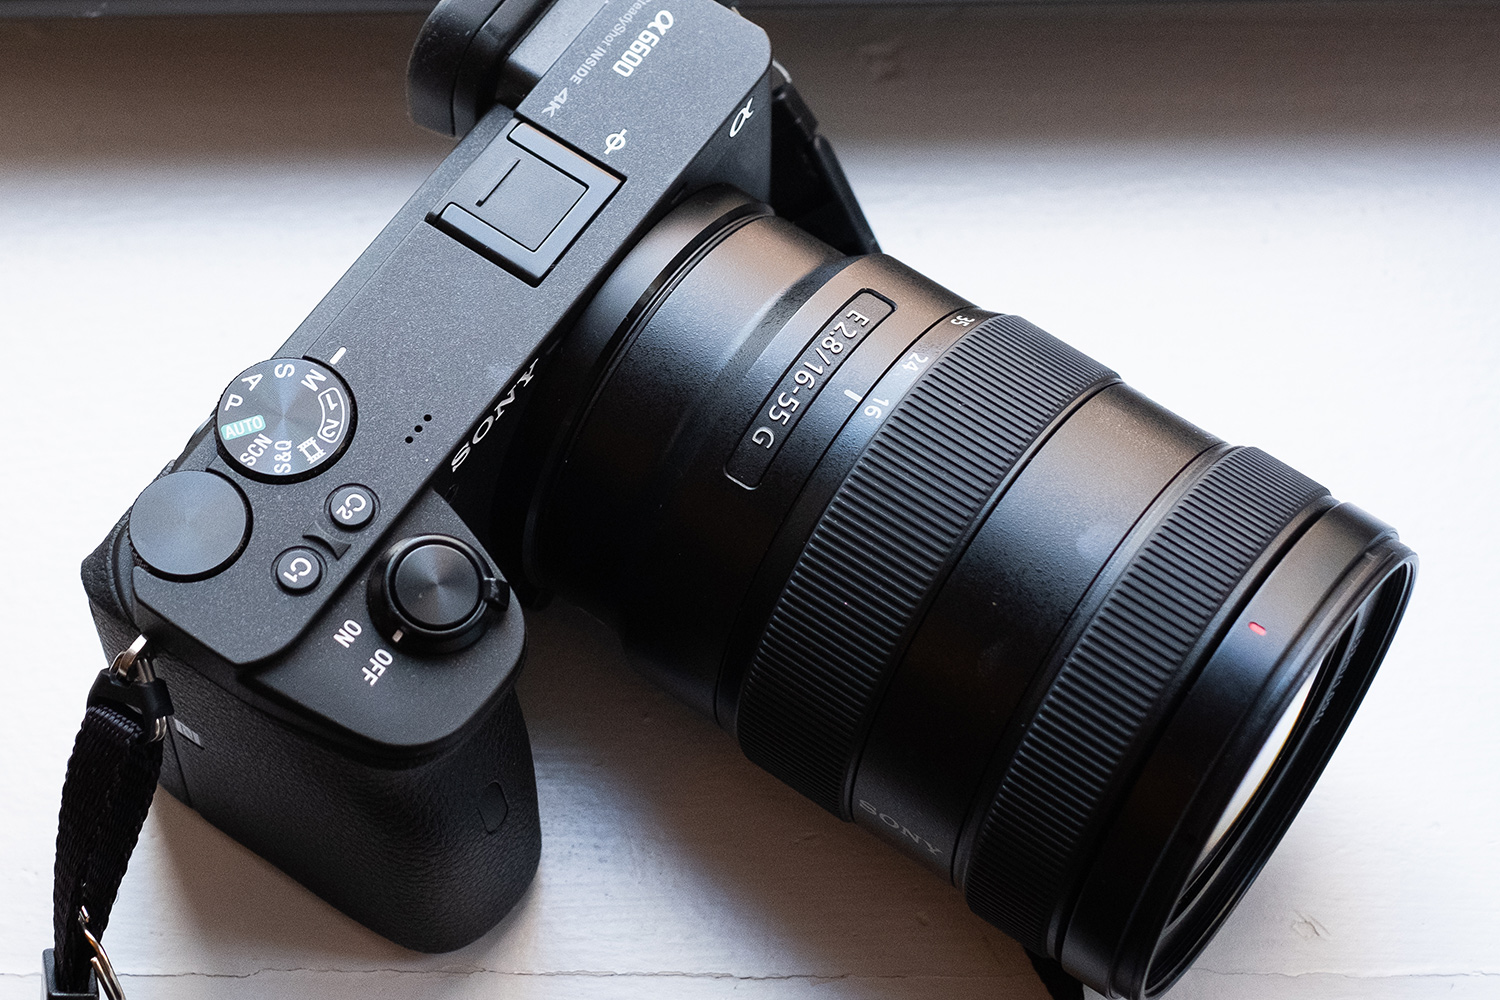 First shots with Sony's 24.2-megapixel a6600 mirrorless camera